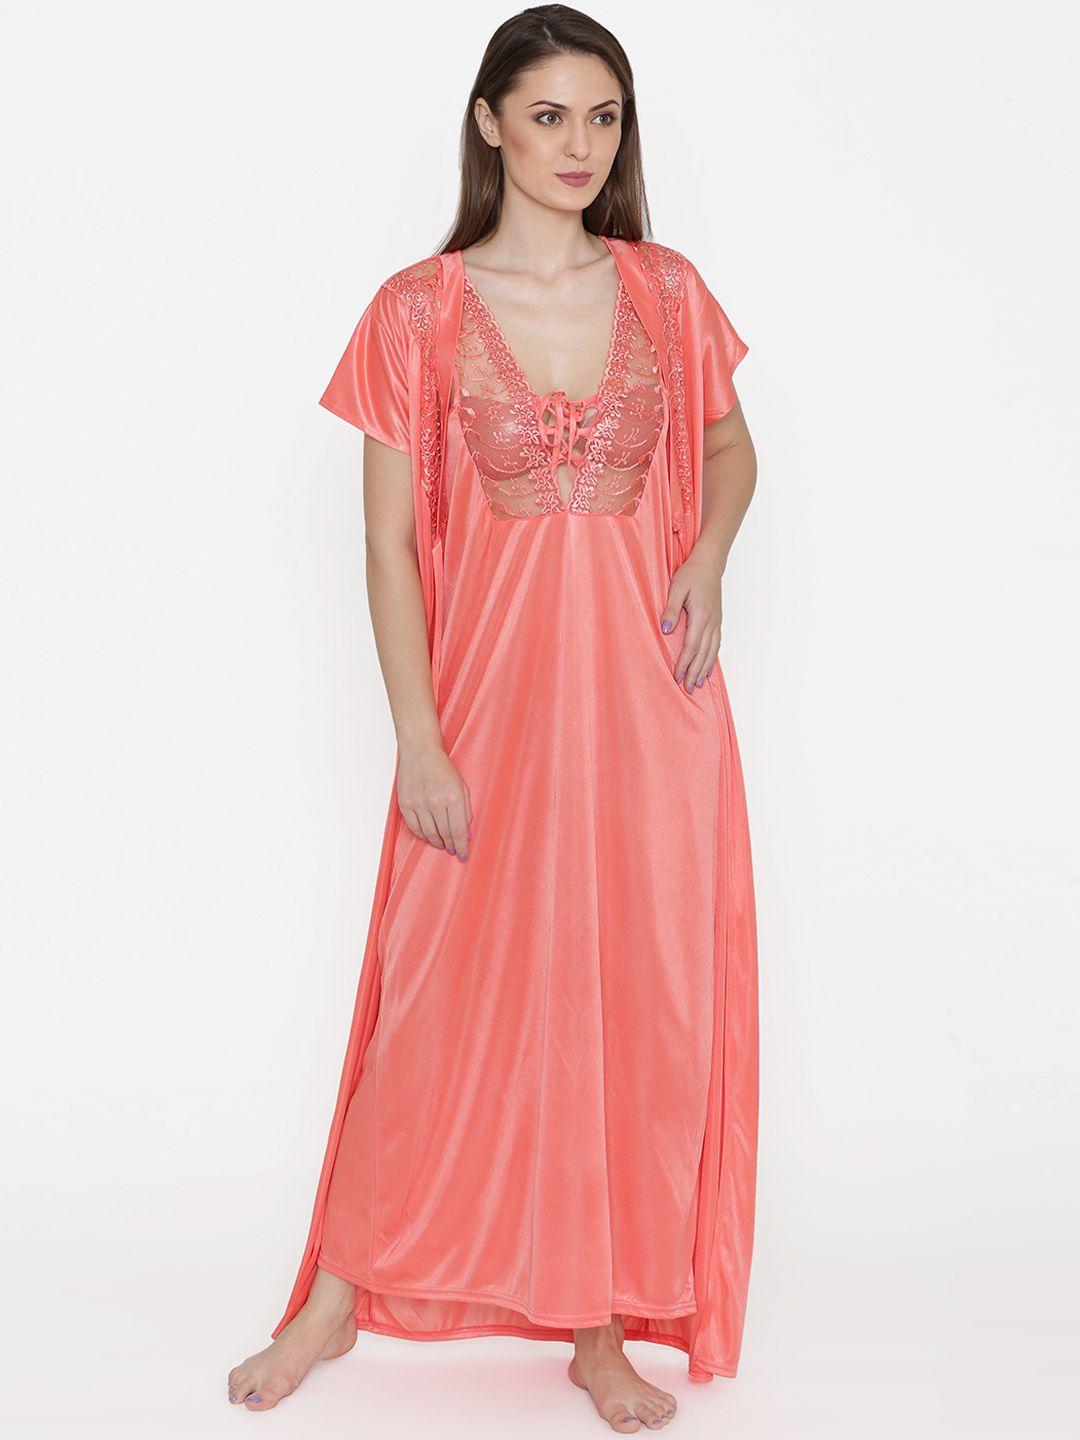 n-gal orange embroidered lace bridal nightdress with robe